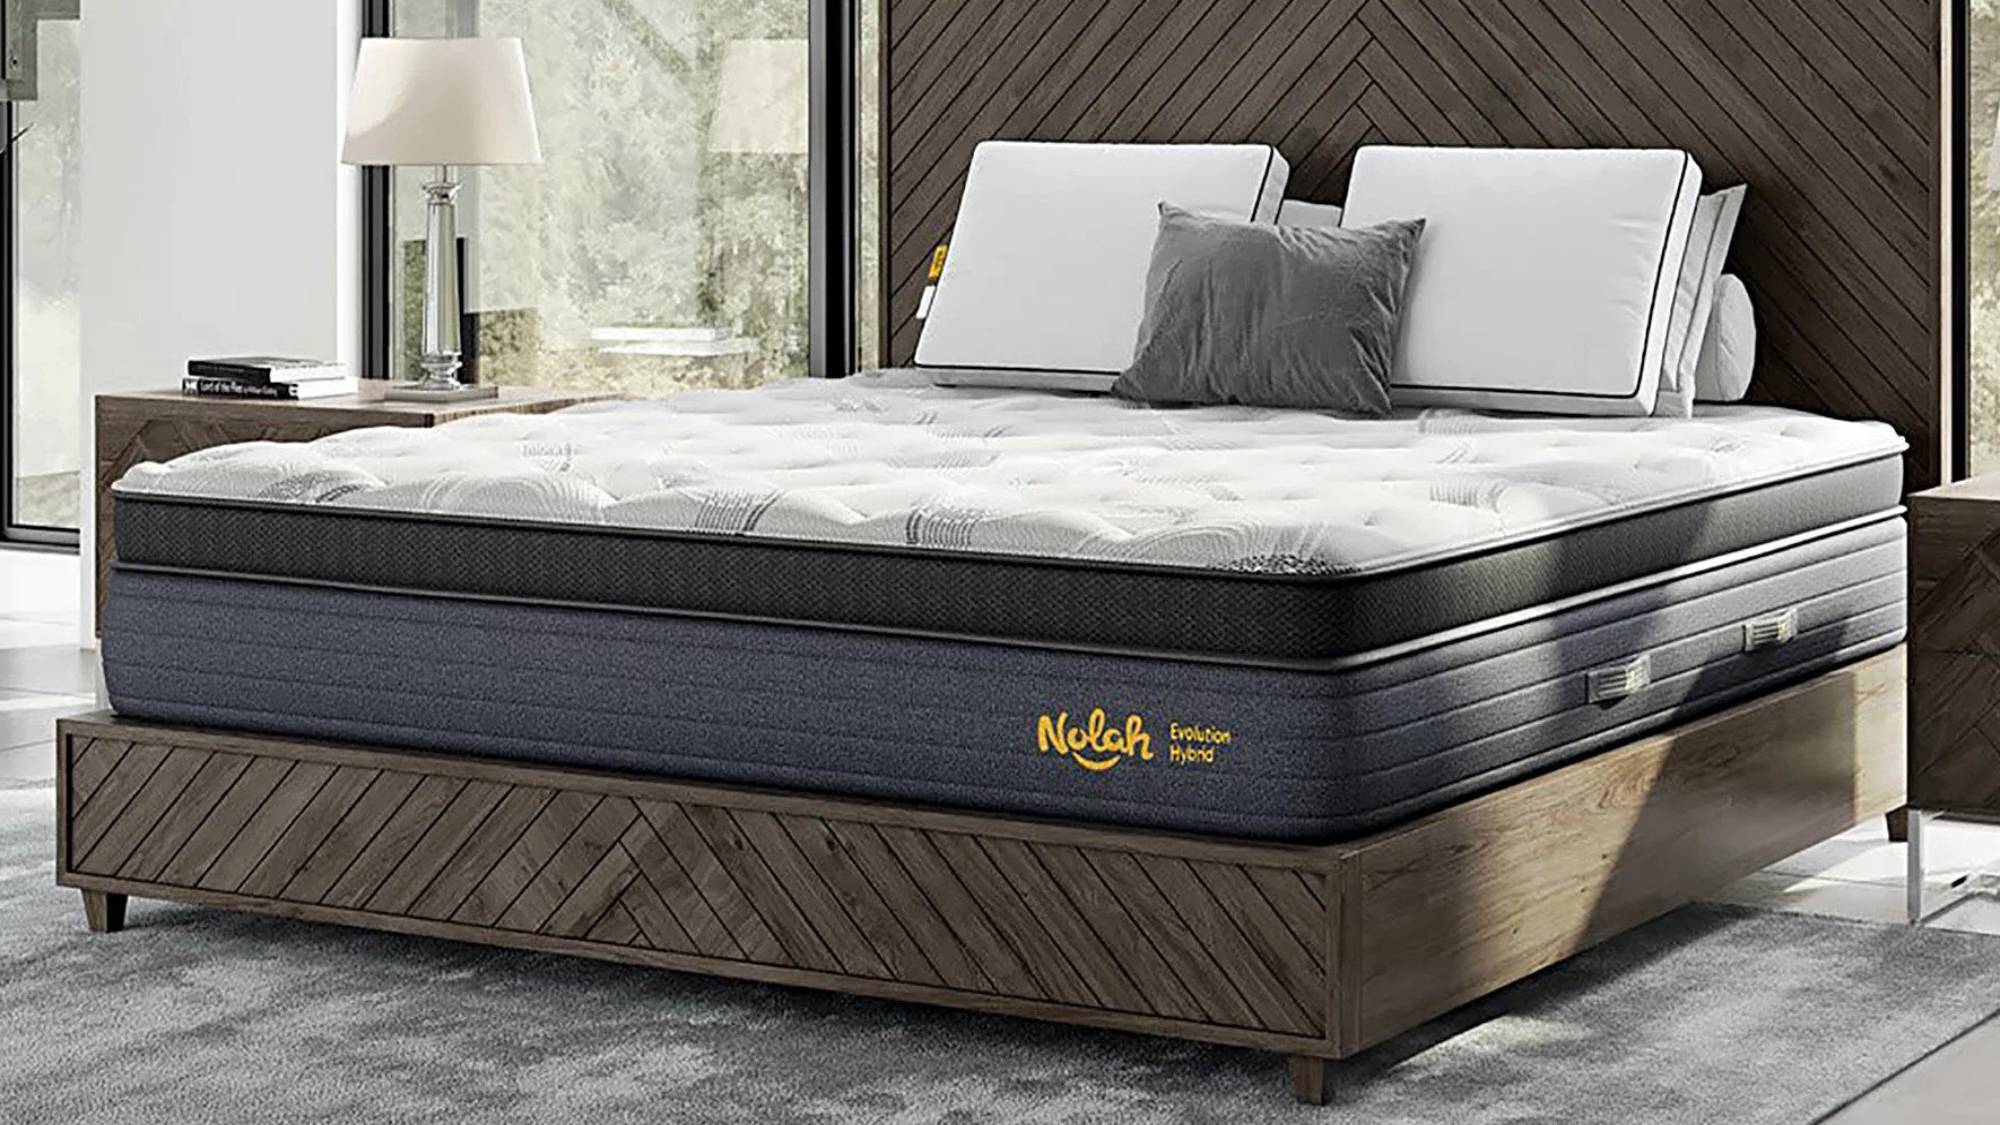 Nolah Mattress coupon codes - in August 2022 | Tom's Guide